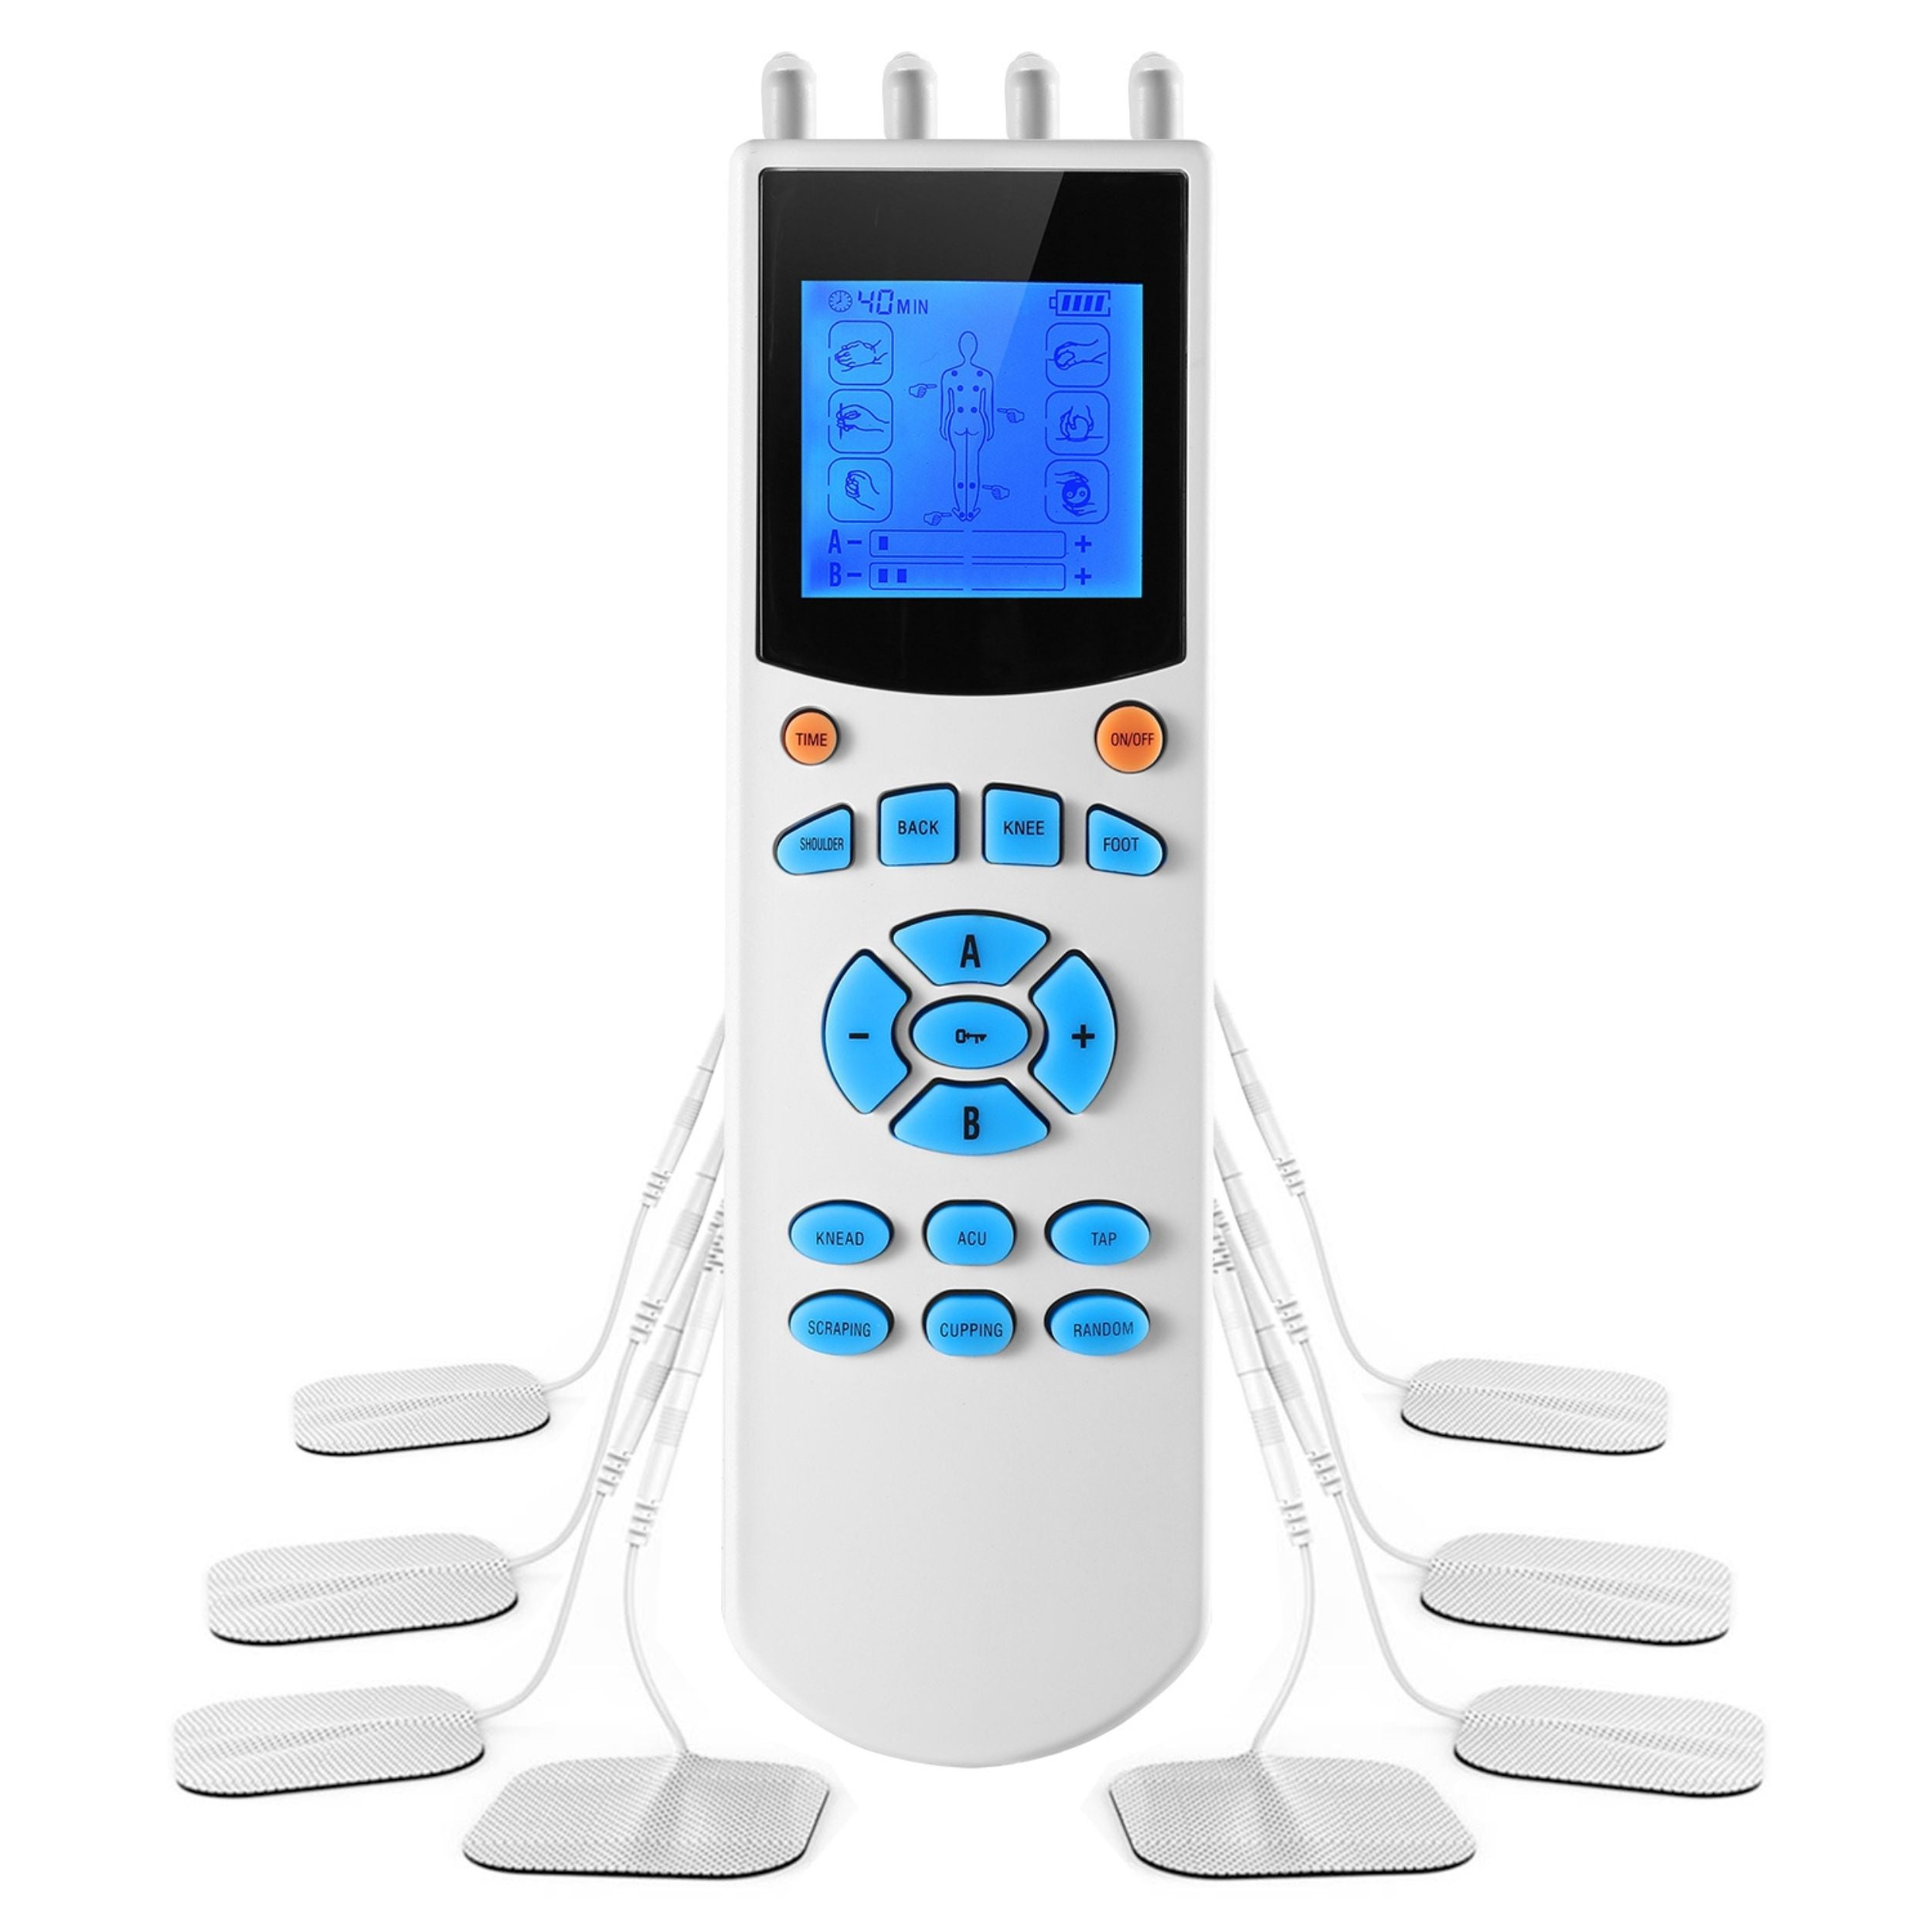 title:10 Mode Tens Unit Impulse Massager - Pain Relief Muscle Stimulator with 4 Outputs & 8 Electrode Pads;color:White